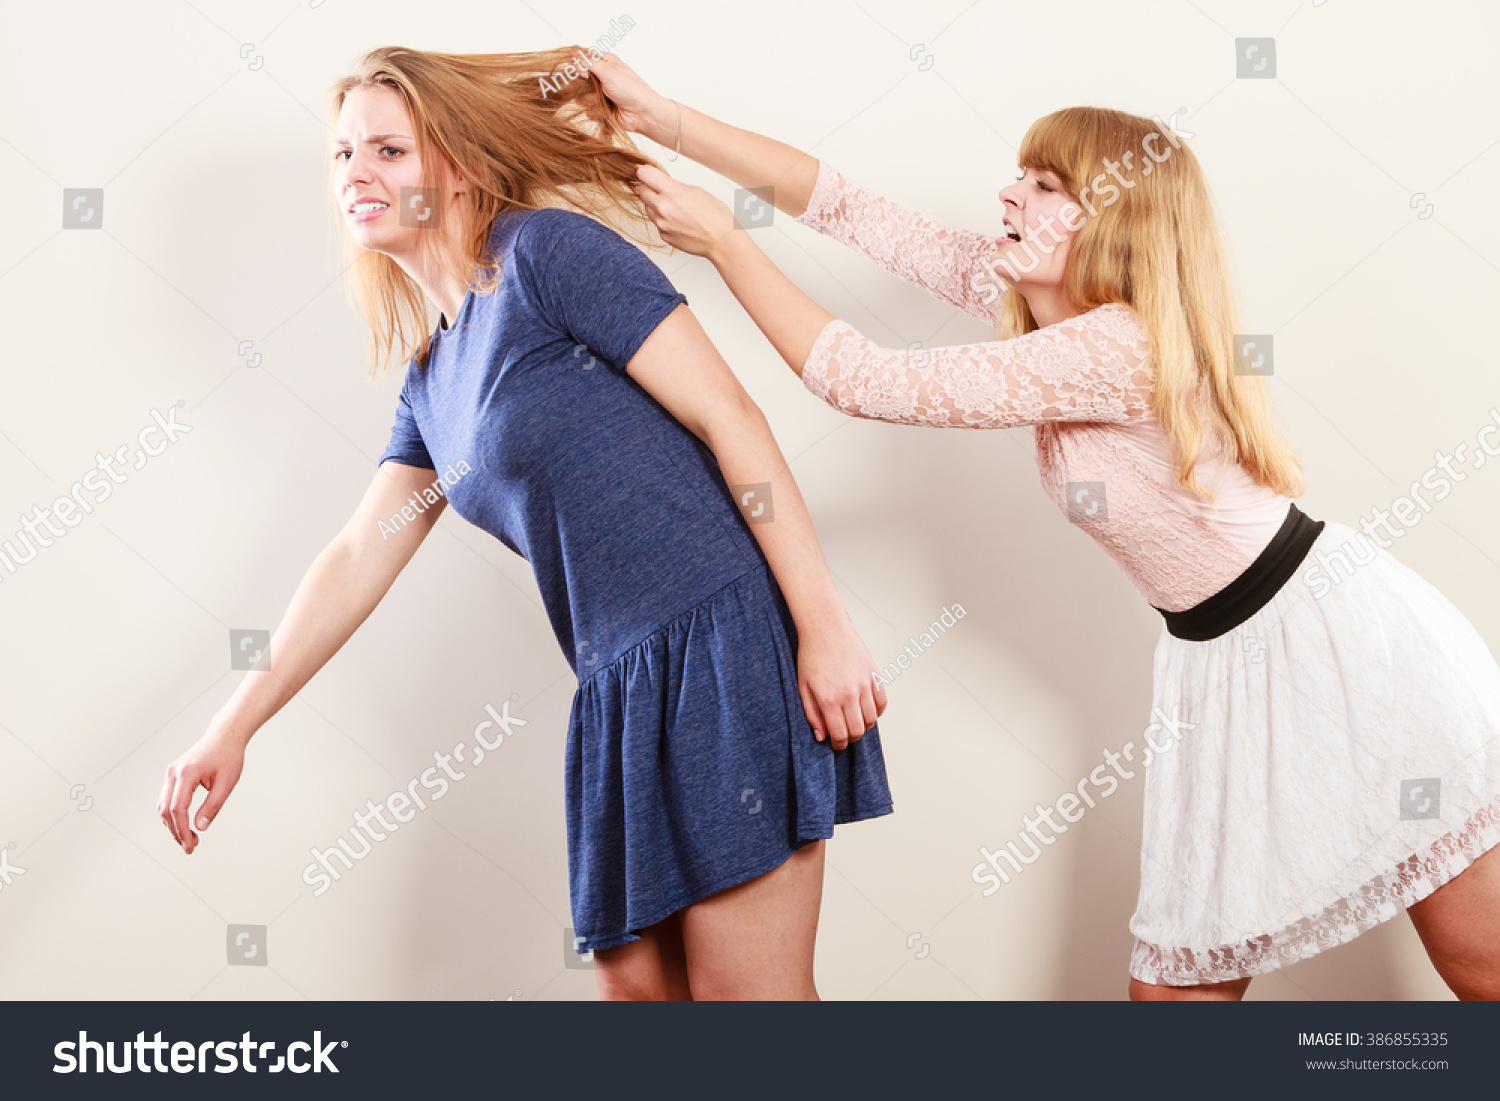 Aggressive Mad Women Fighting Each Other Pulling Hair Two Young